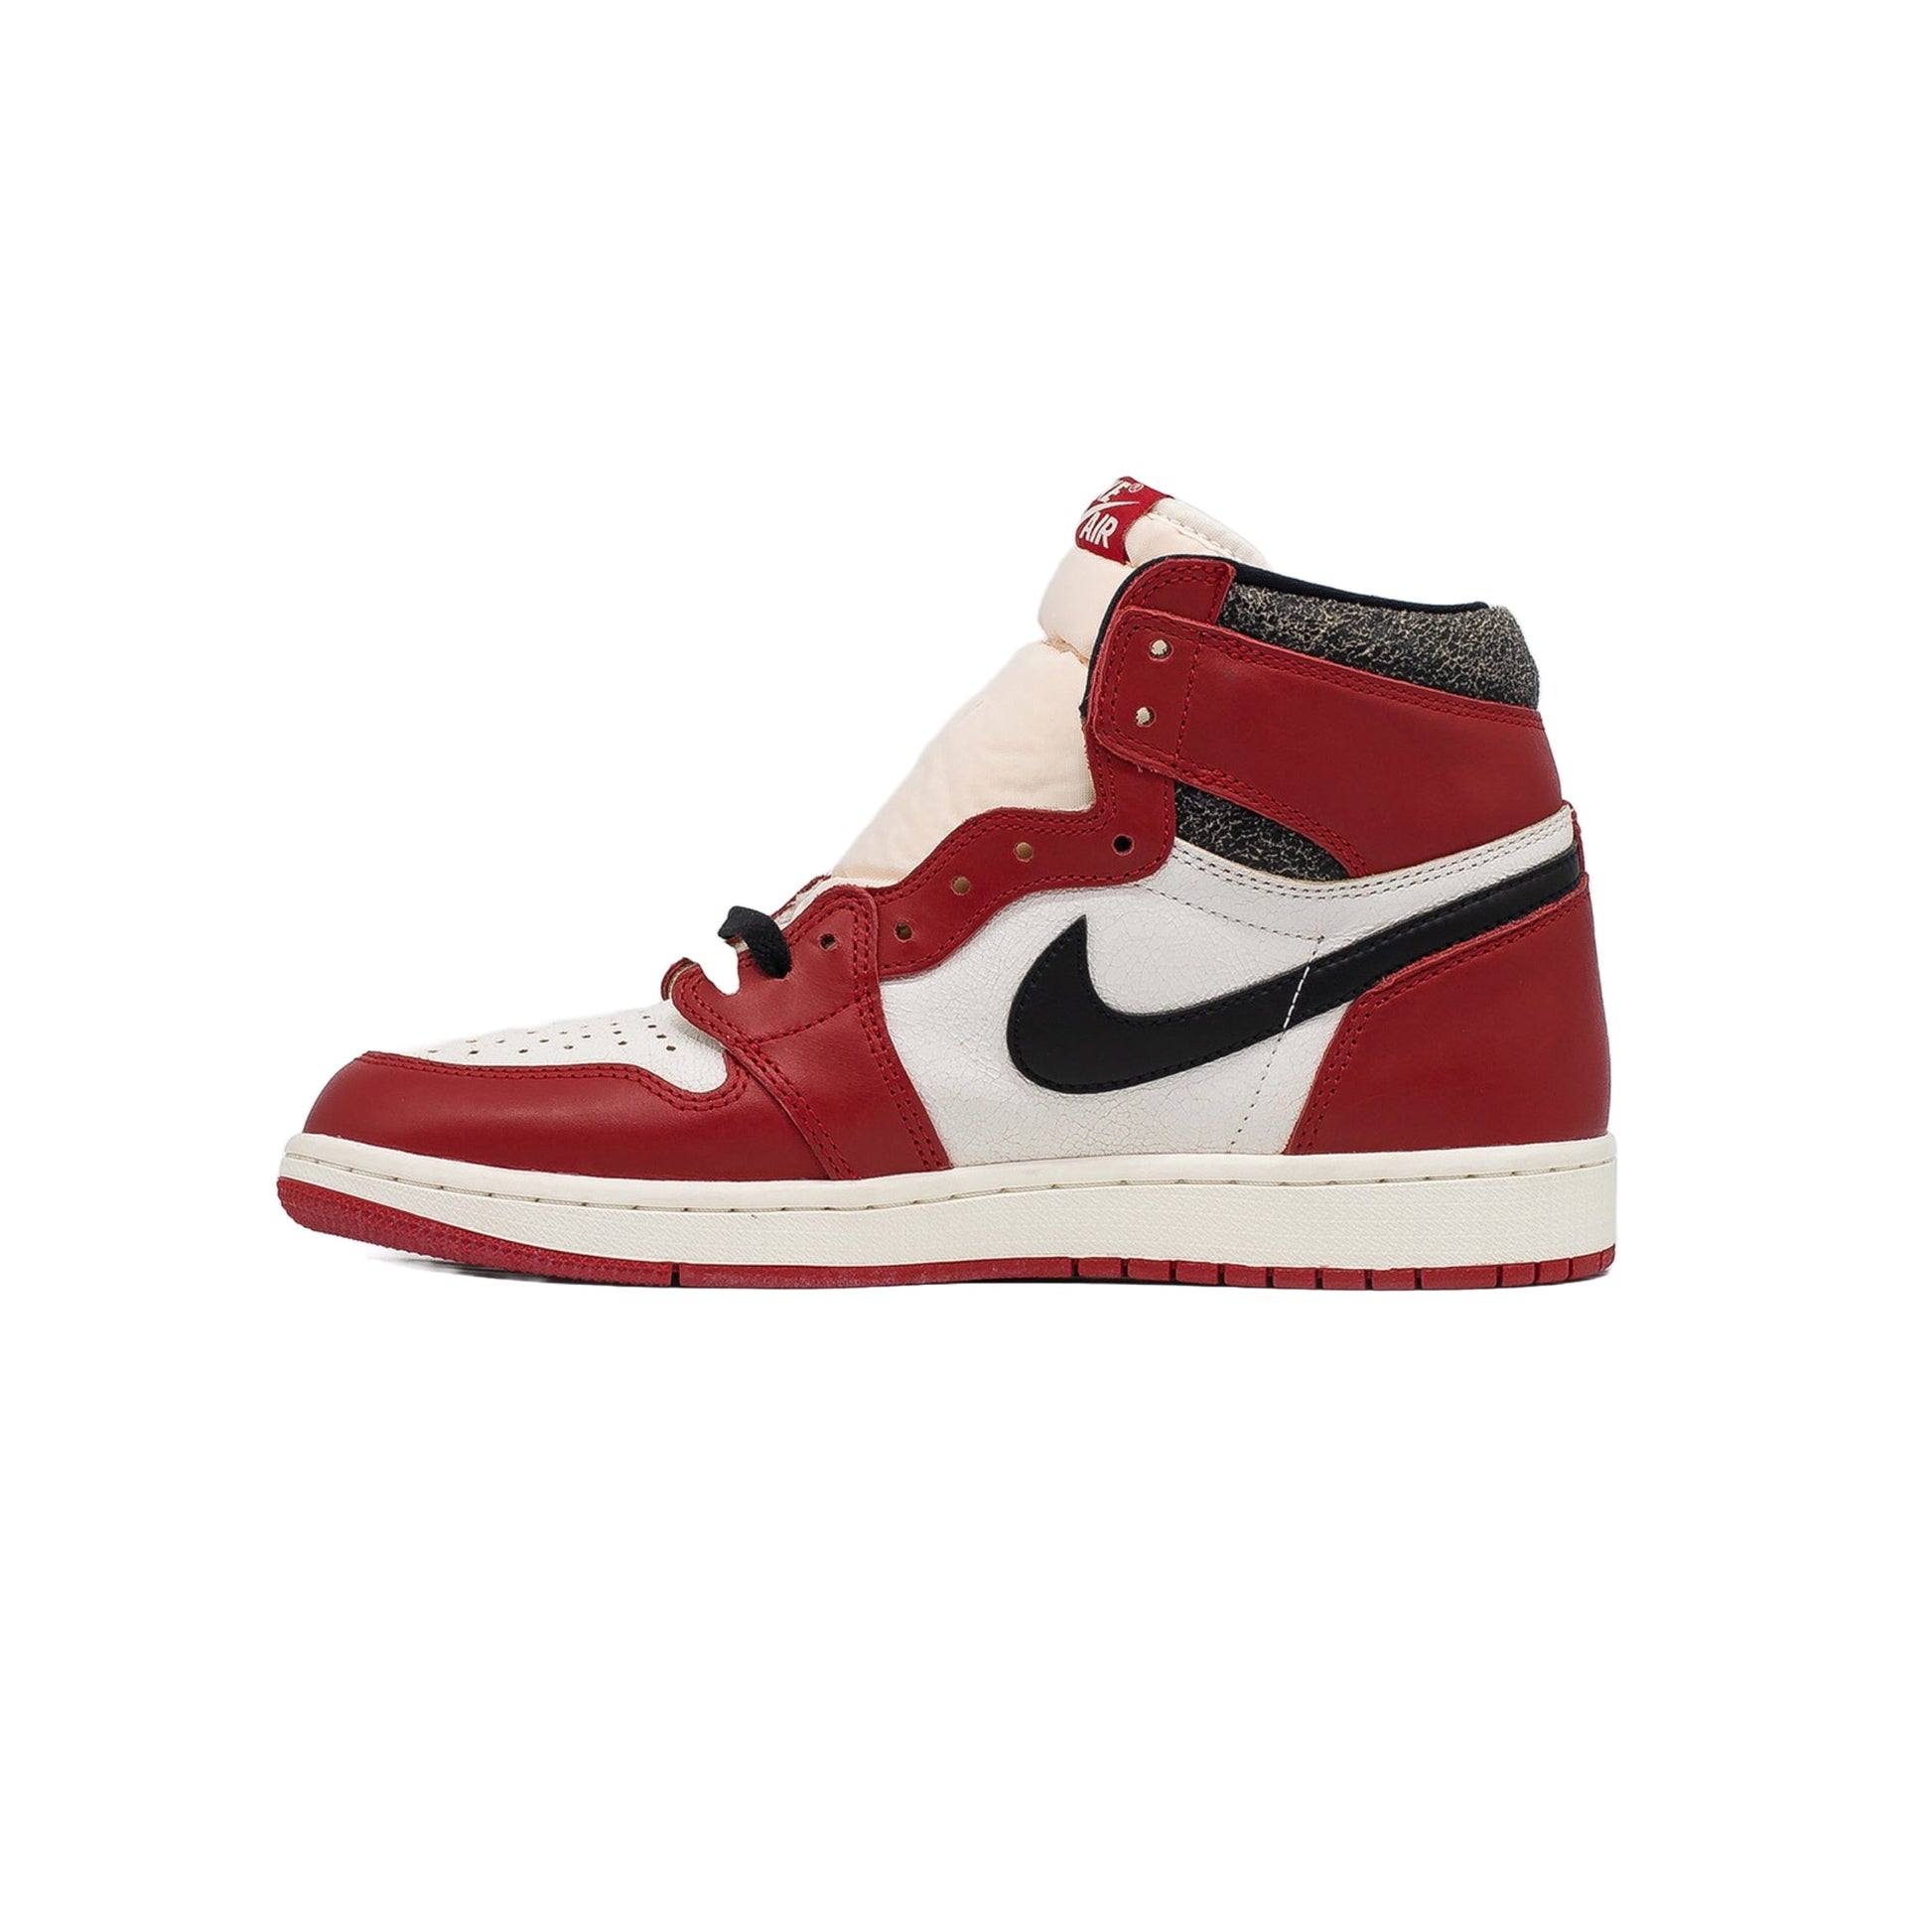 Air chicago jordan 1 High (GS), Chicago Lost And Found